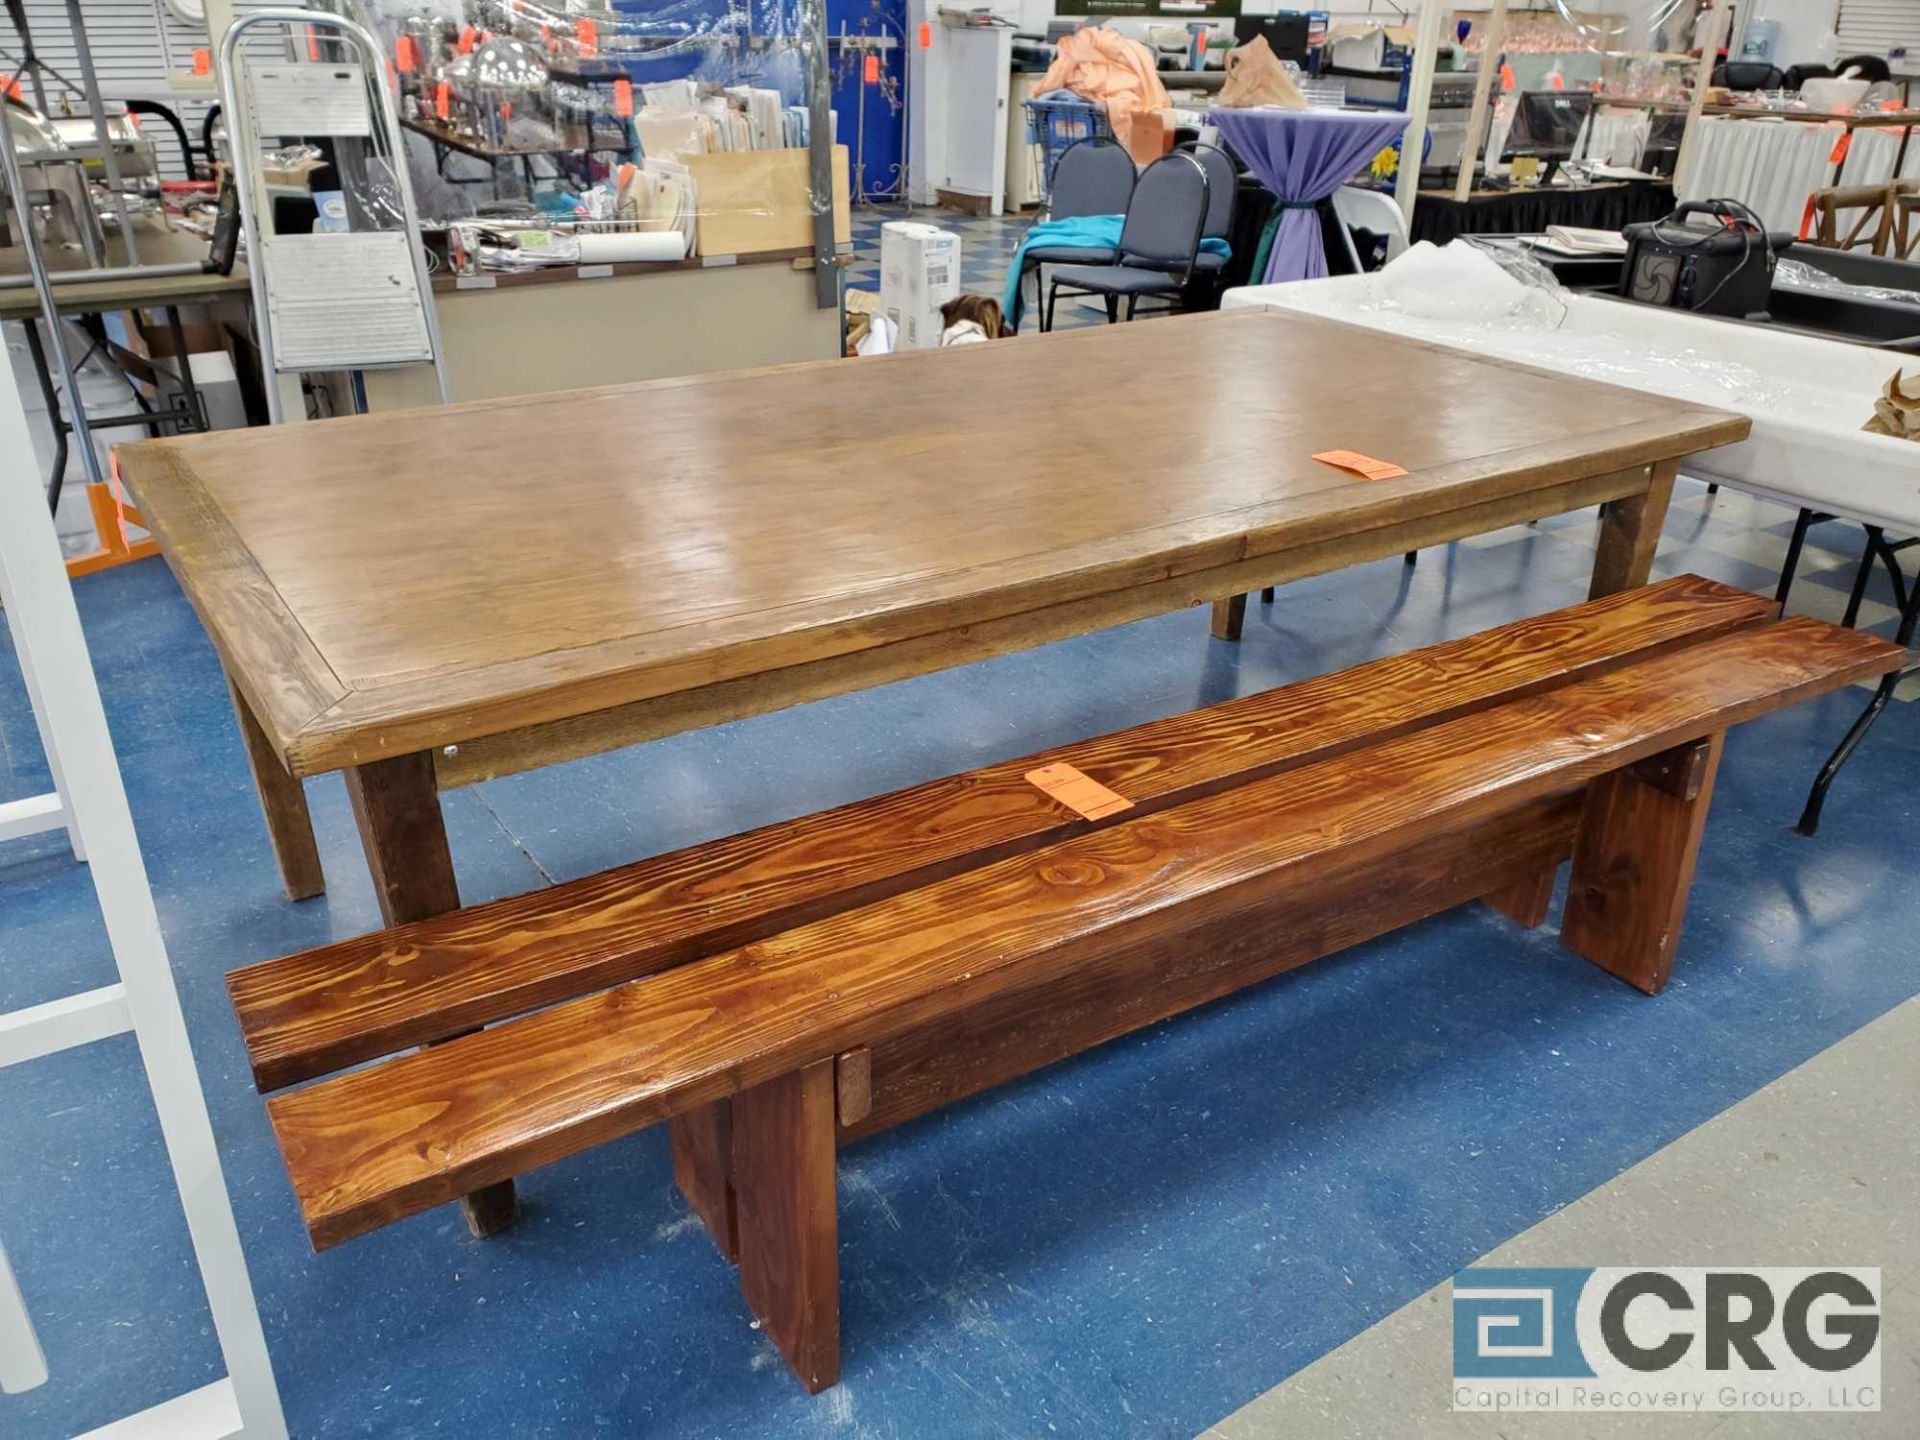 48 in. x 8' farm table - Image 3 of 3